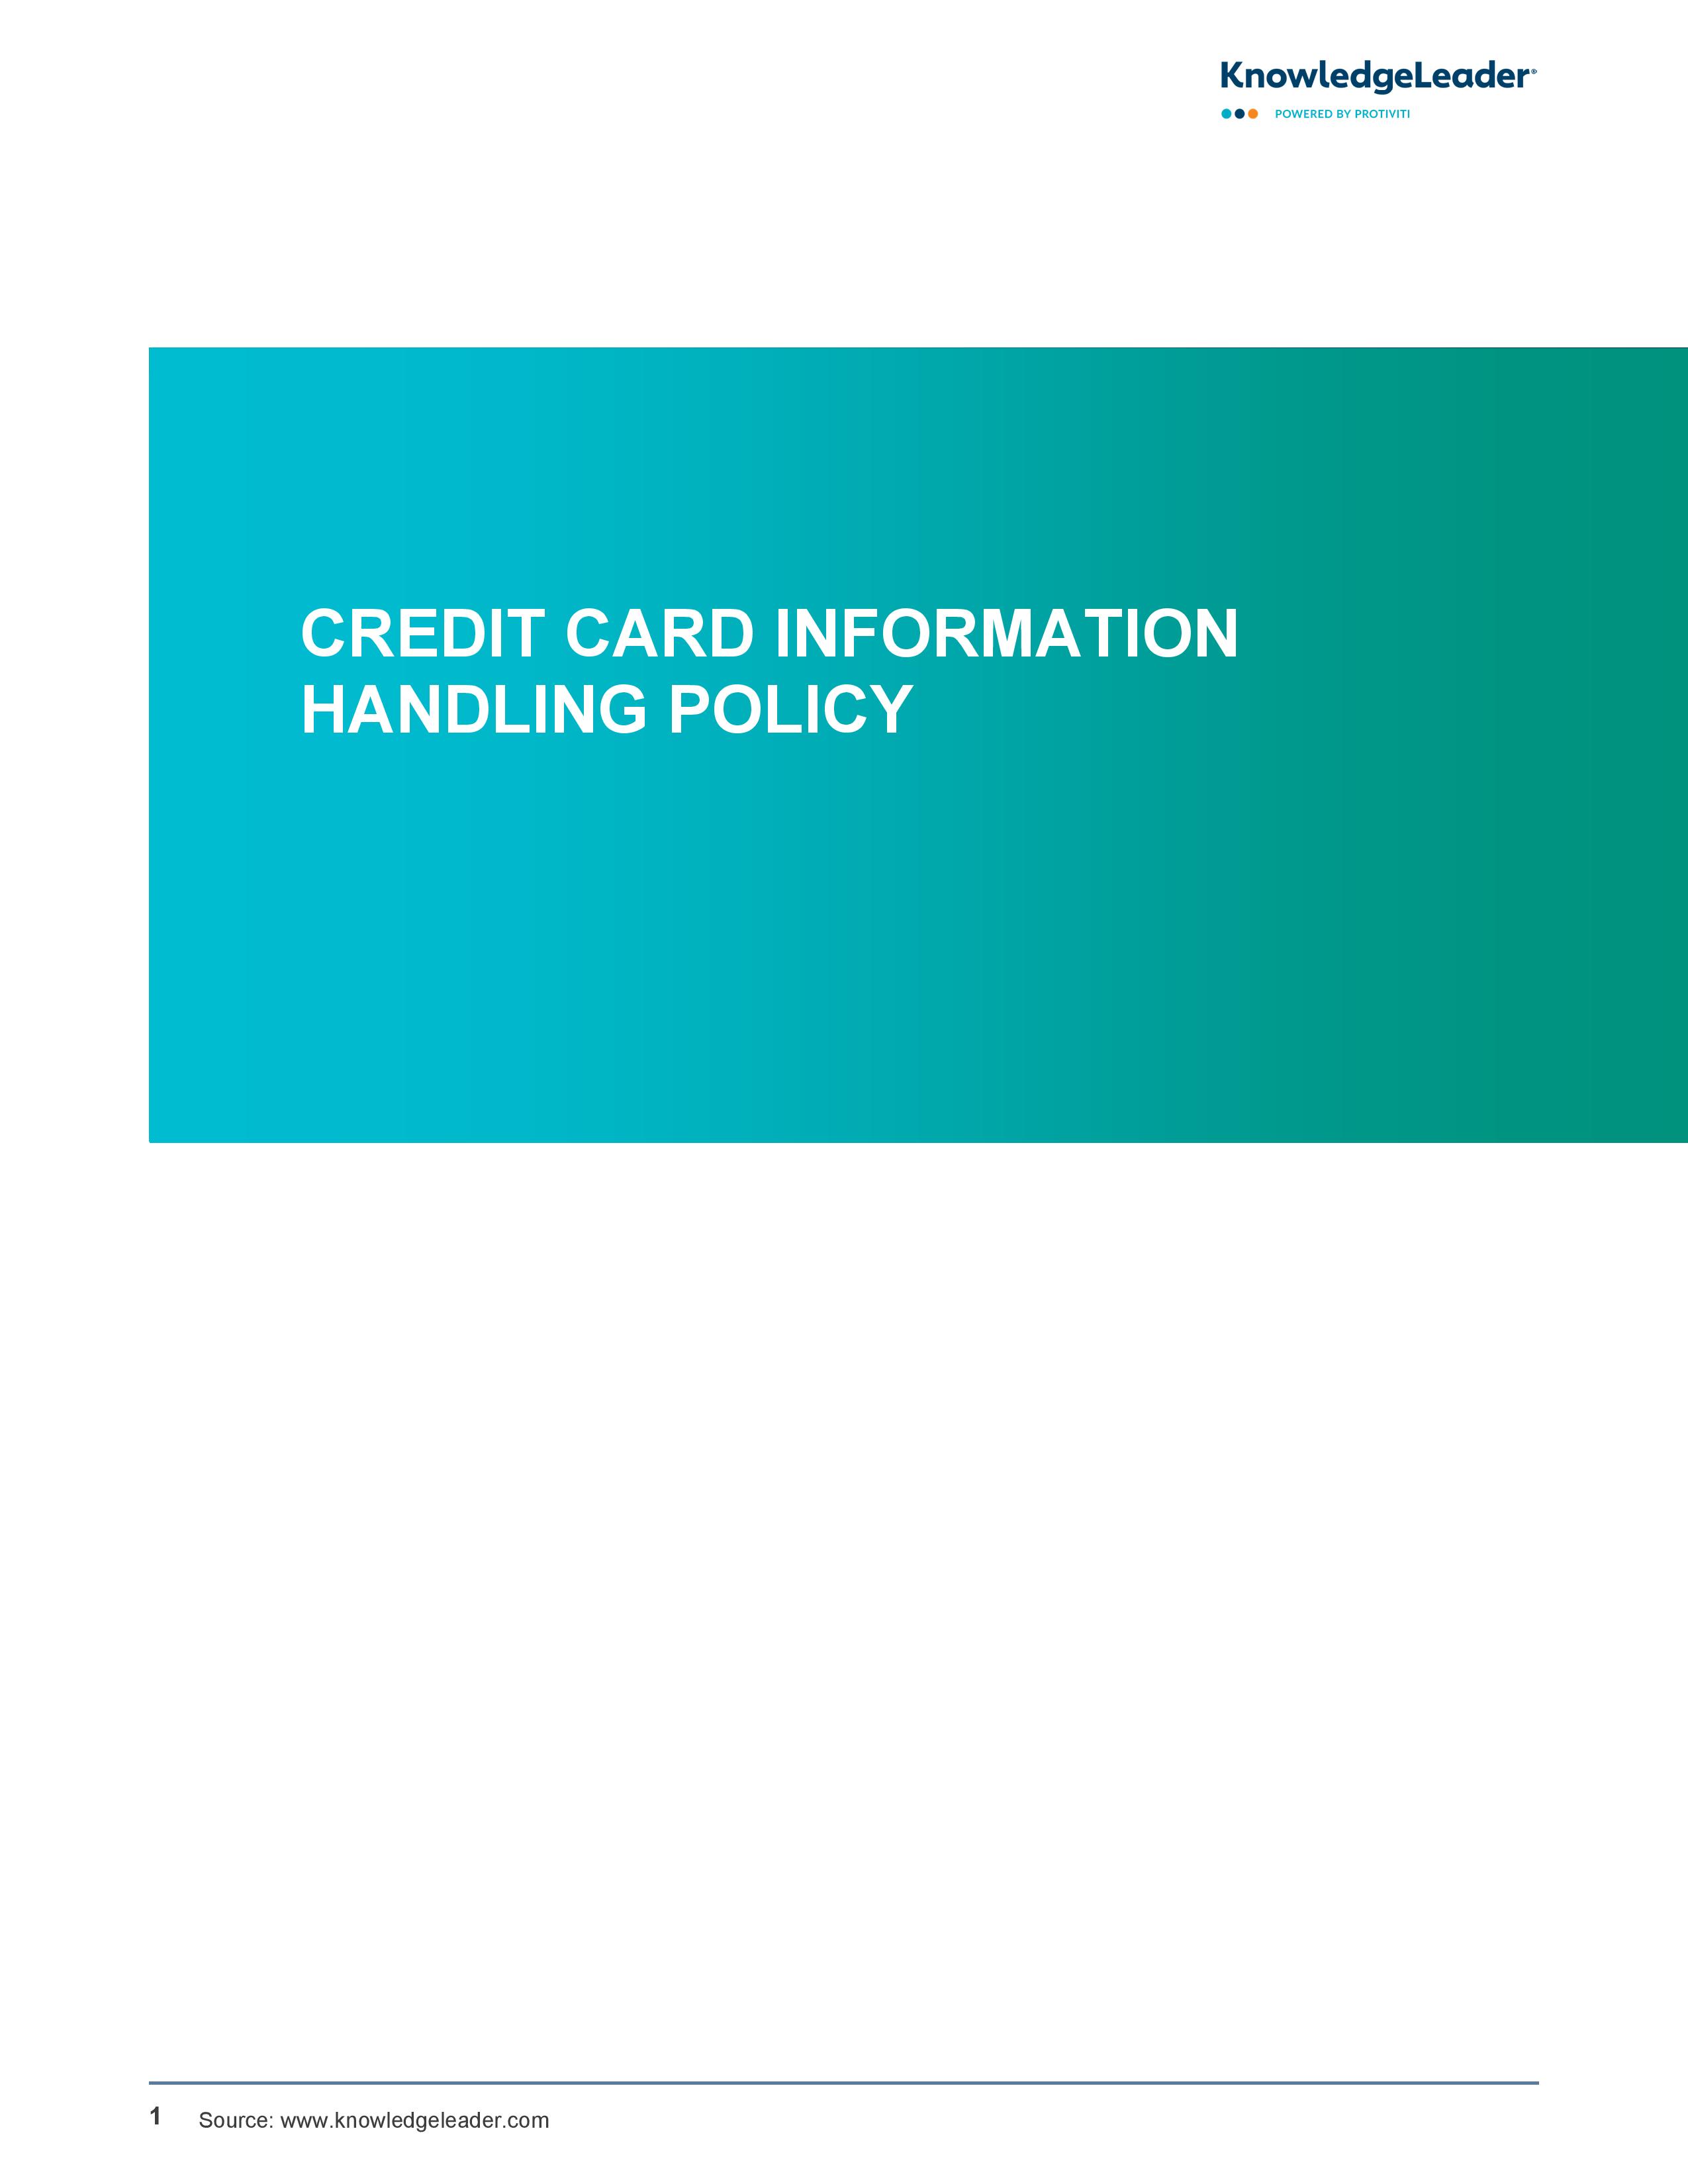 Screenshot of the first page of Credit Card Information Handling Policy